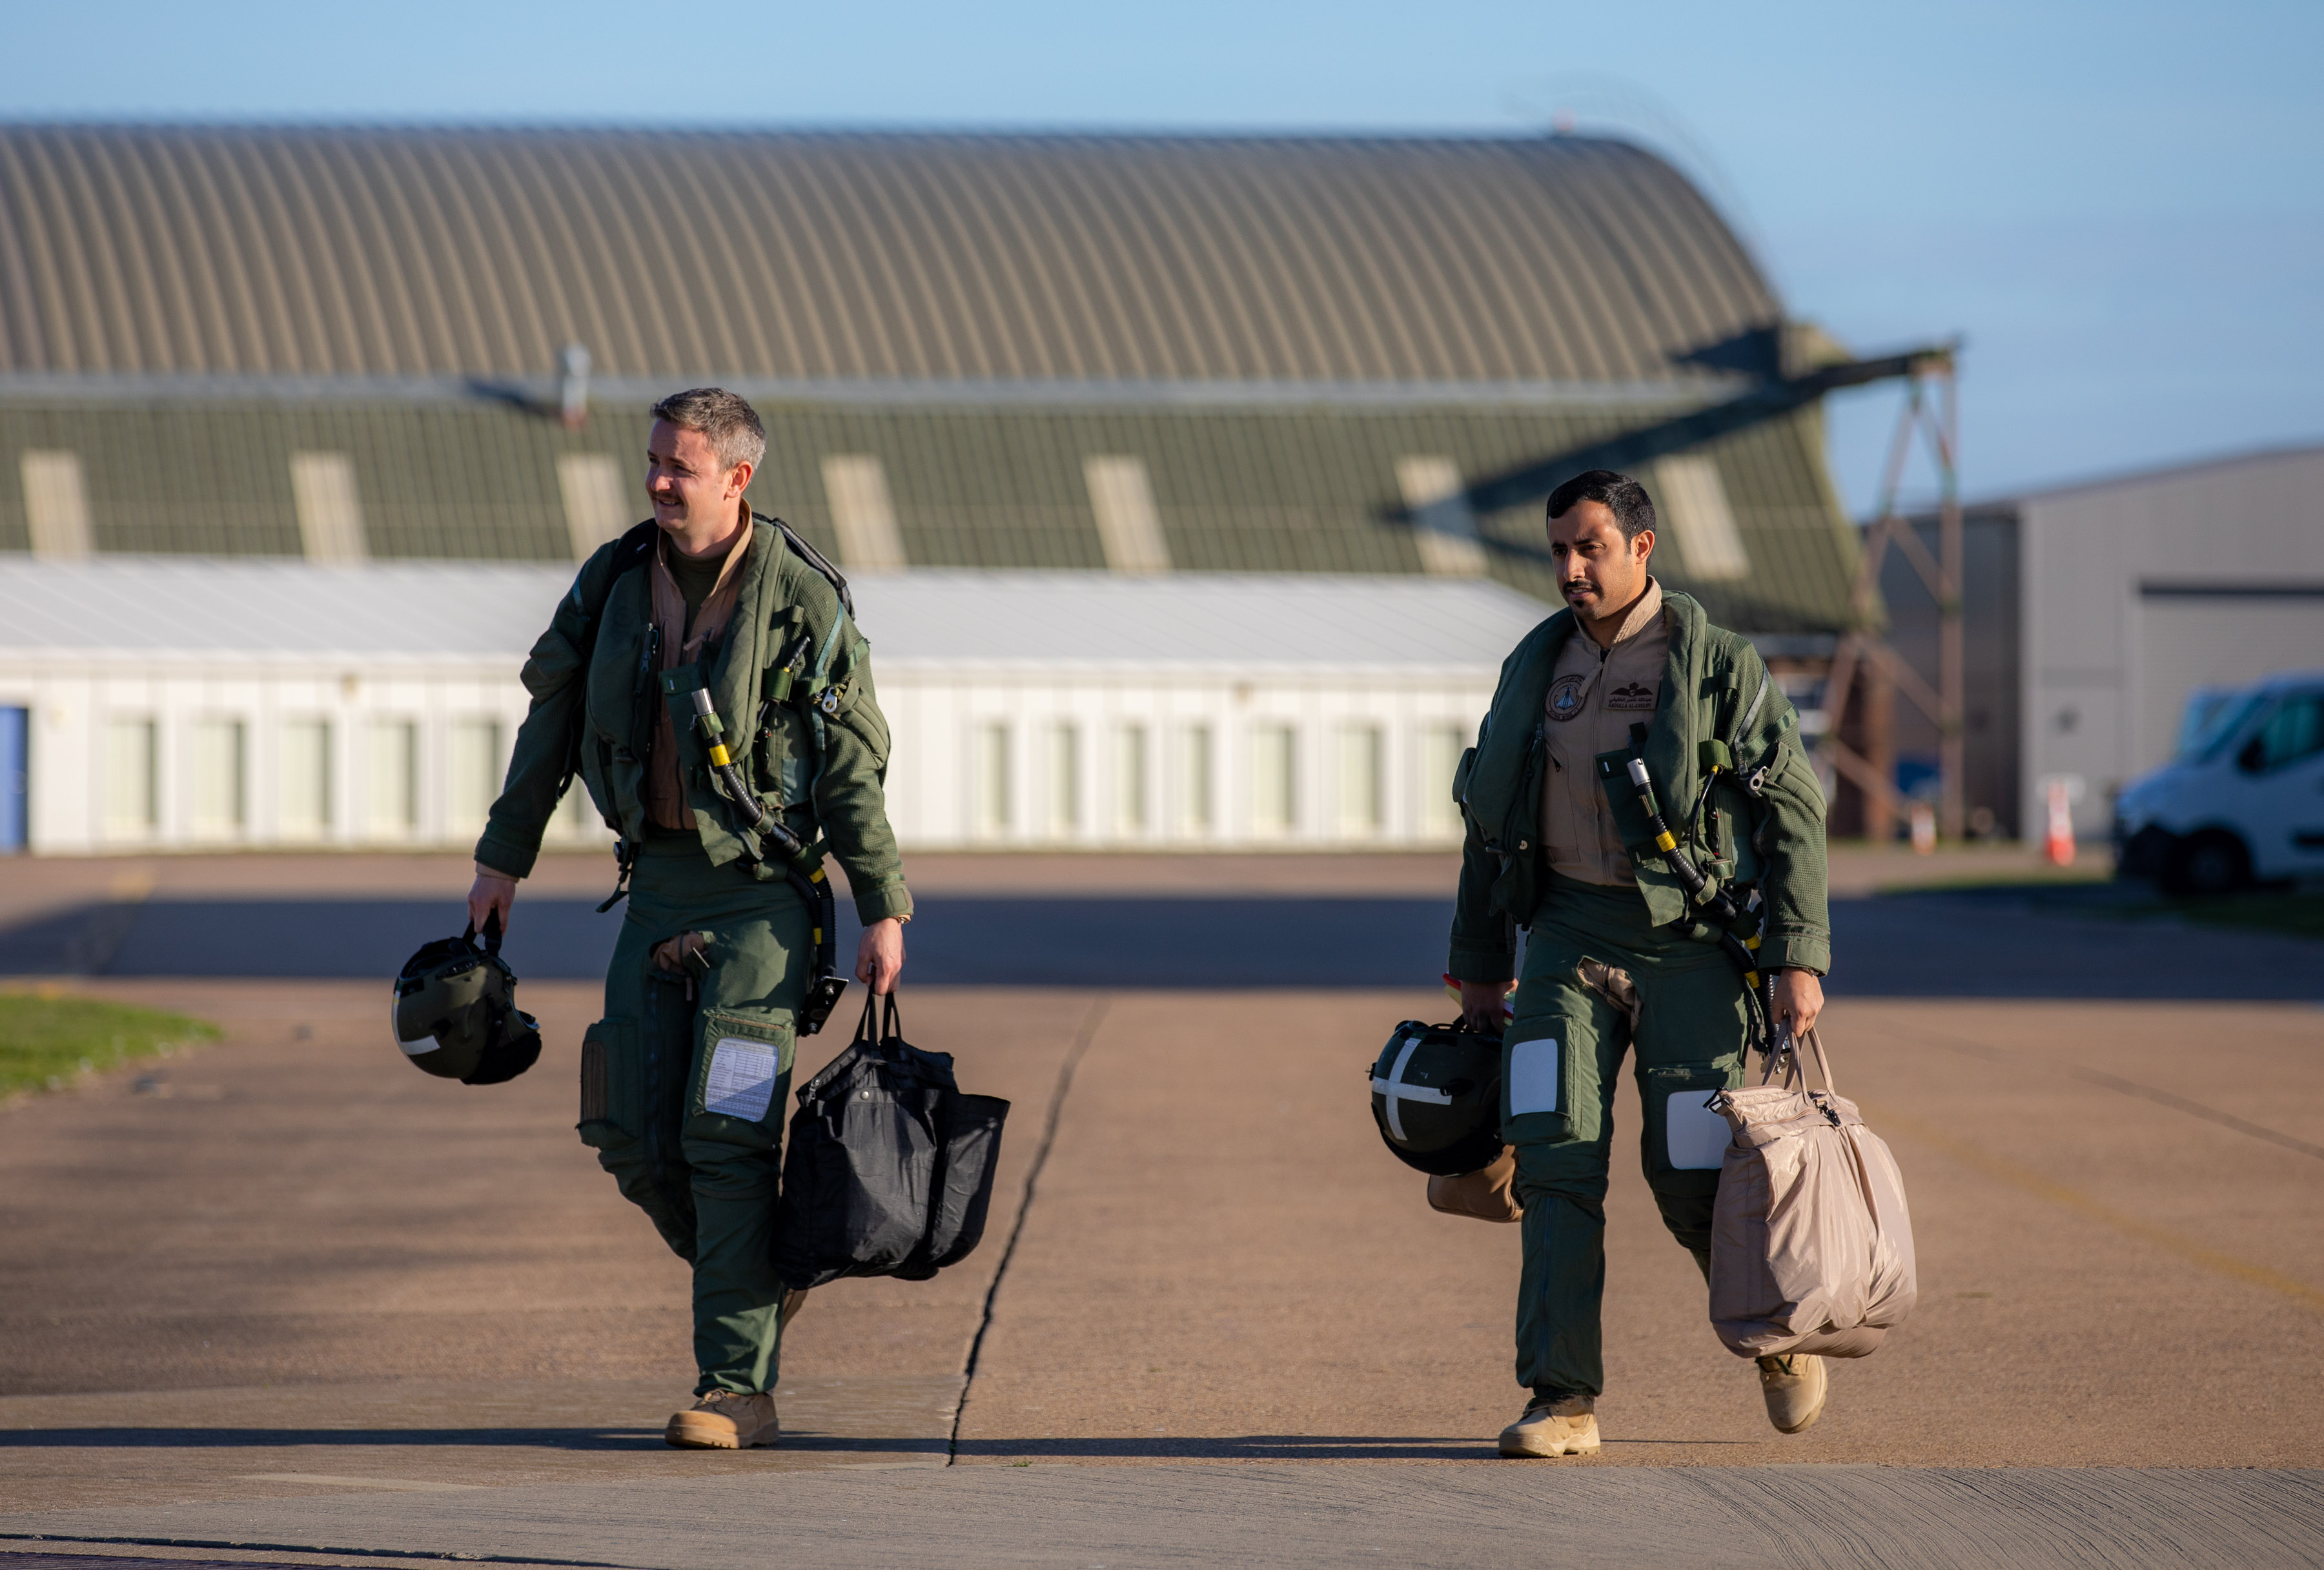 Image shows personnel carrying bags while walking across the airfield.